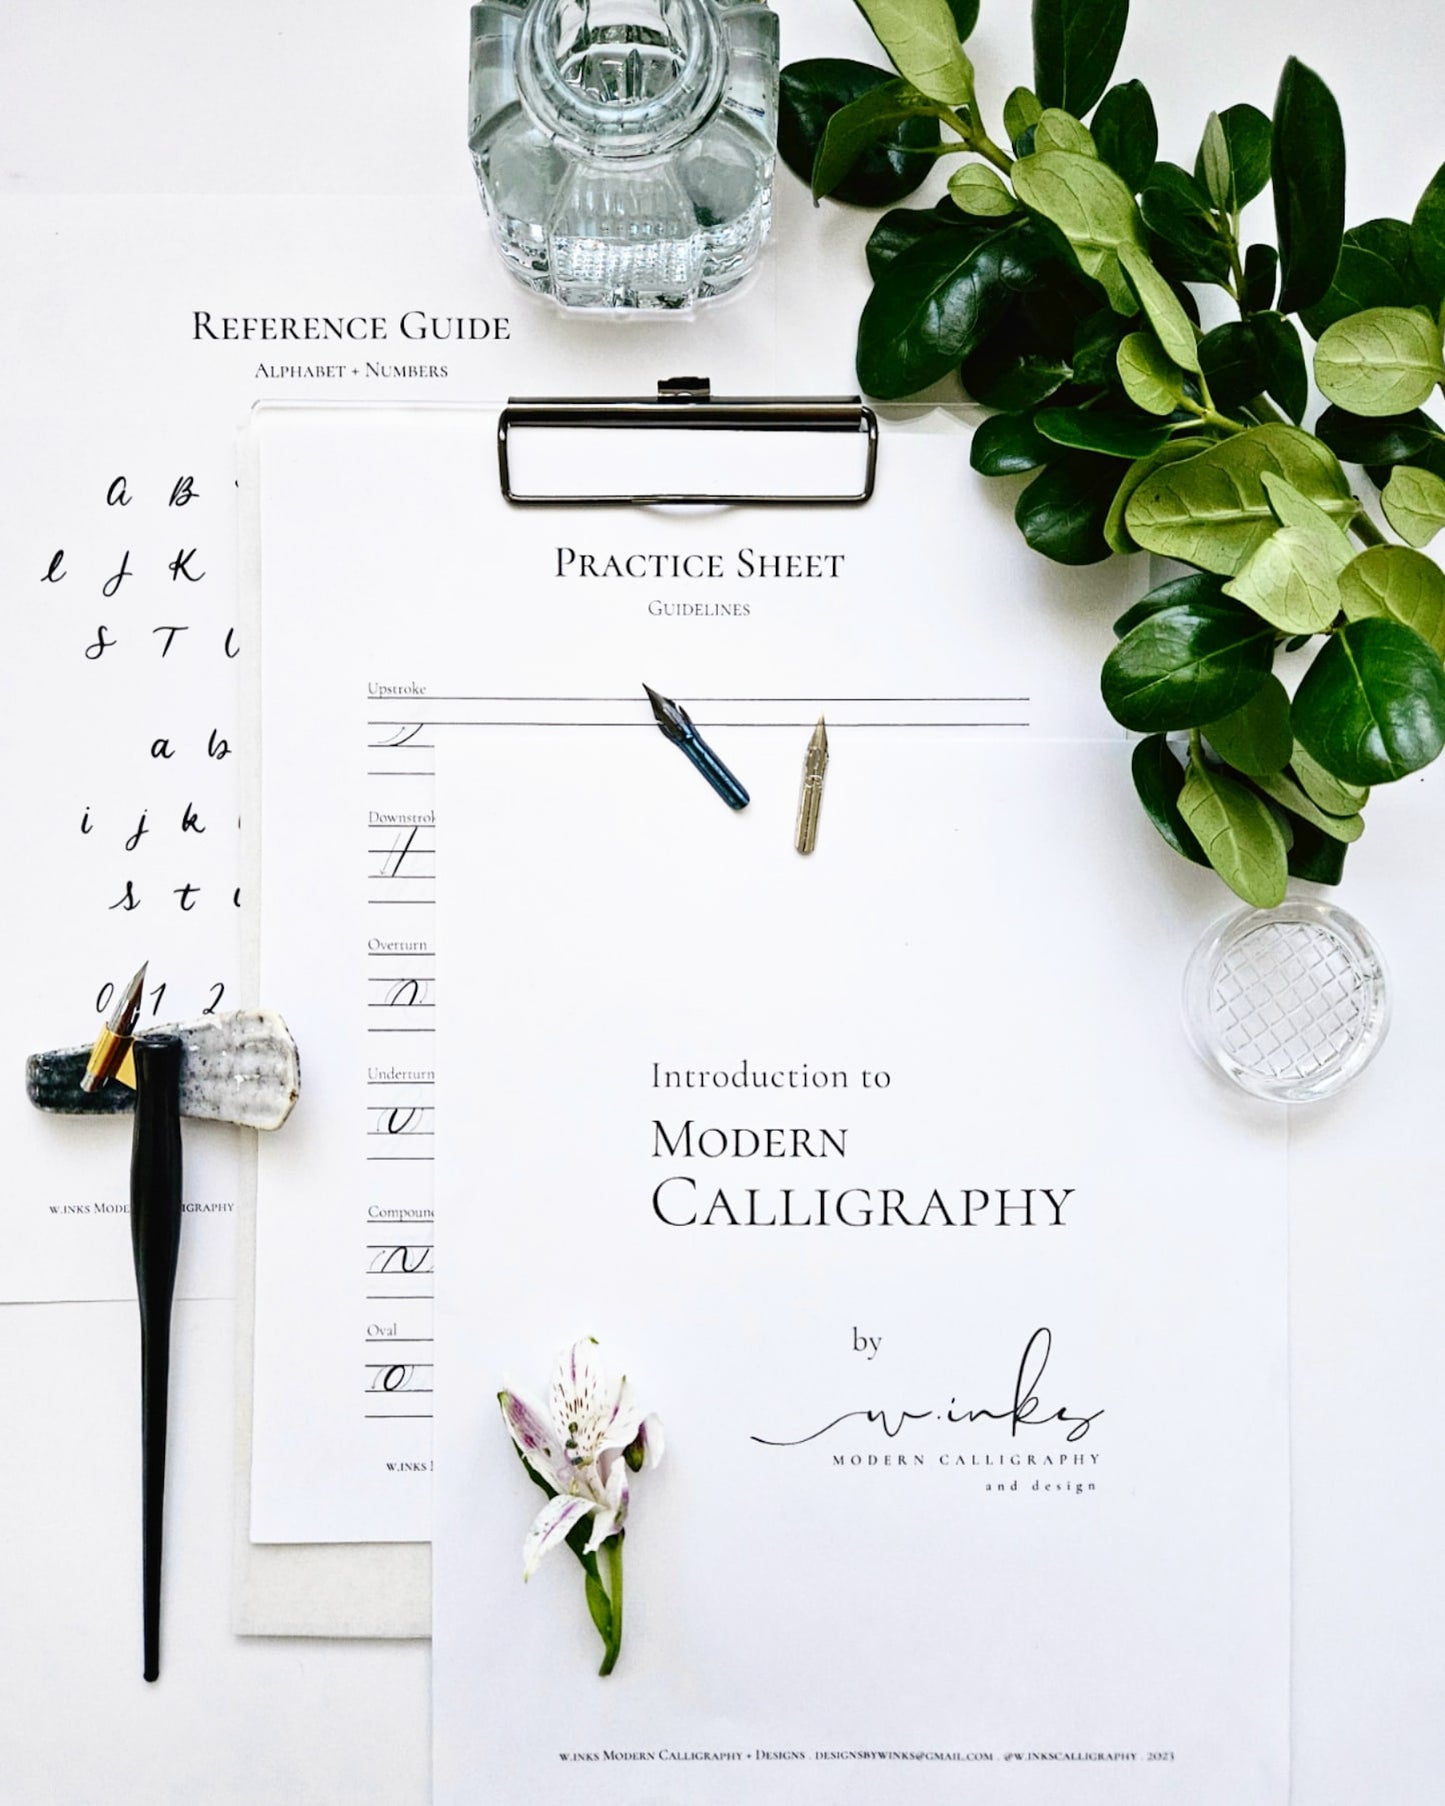 Introduction to Modern Calligraphy